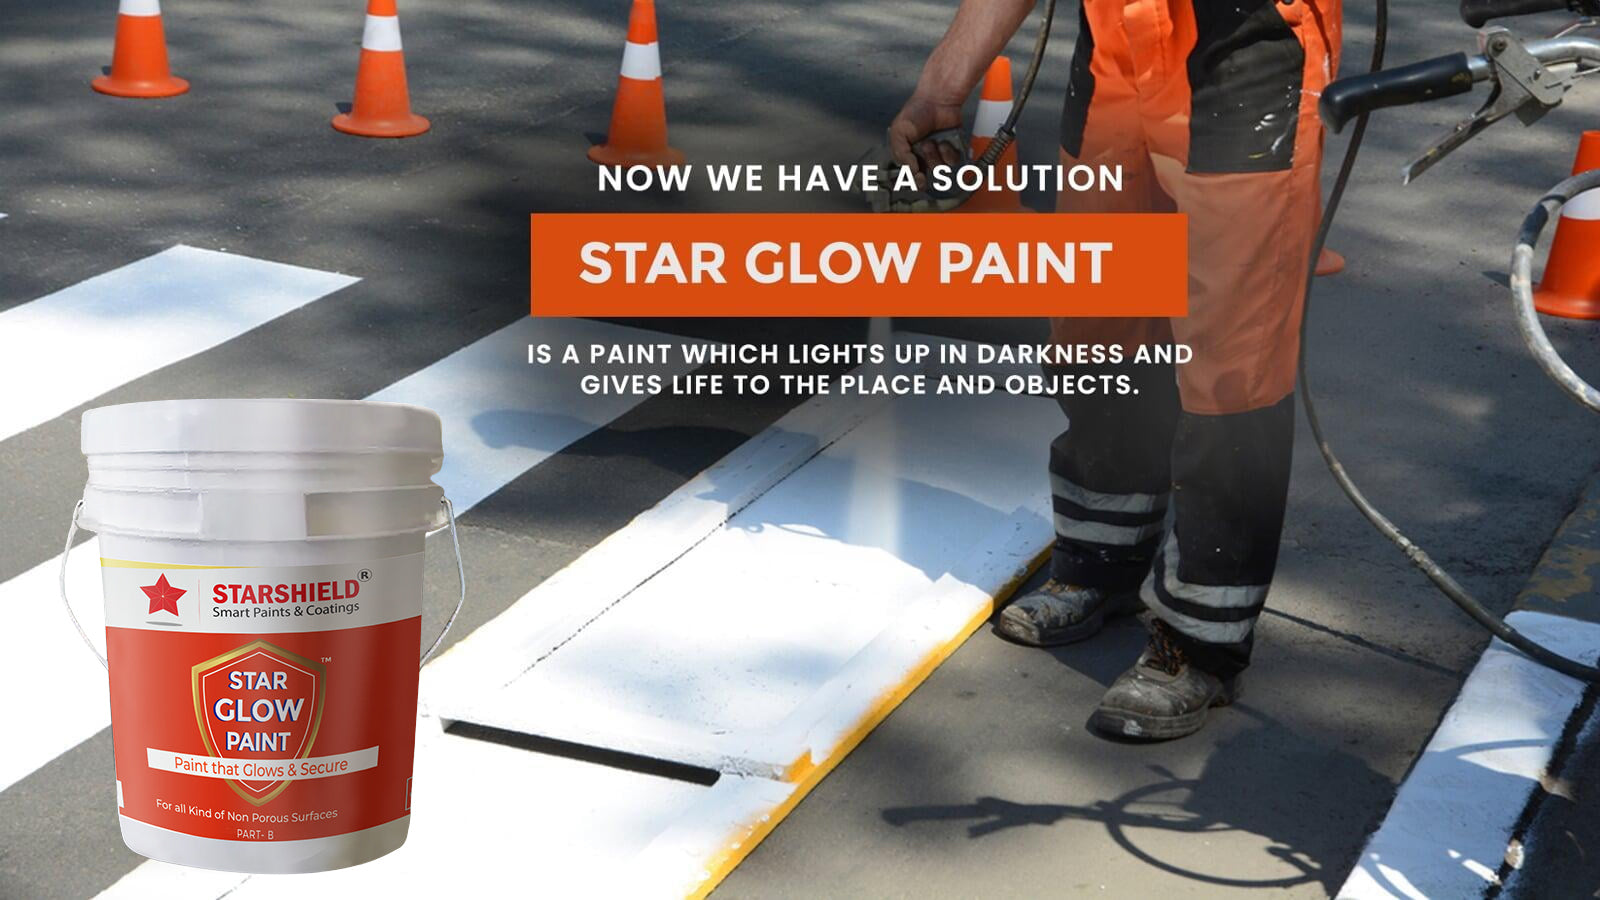 Explore Star Glow Paint: A cost-effective solution, 10 times brighter than competitors.